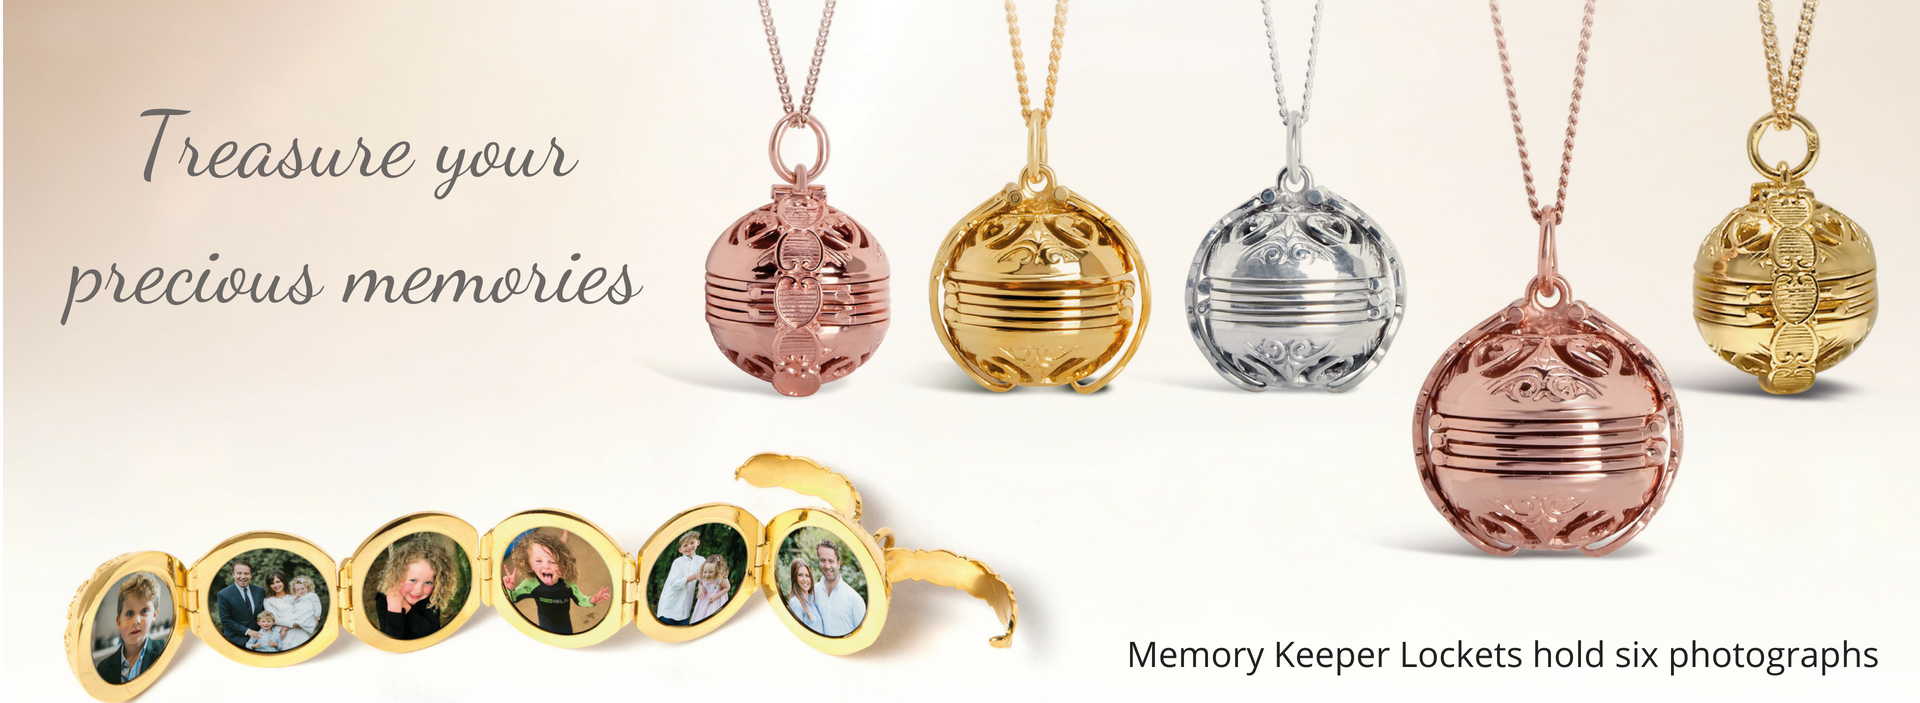 Lily Blanche Memory Keeper Lockets